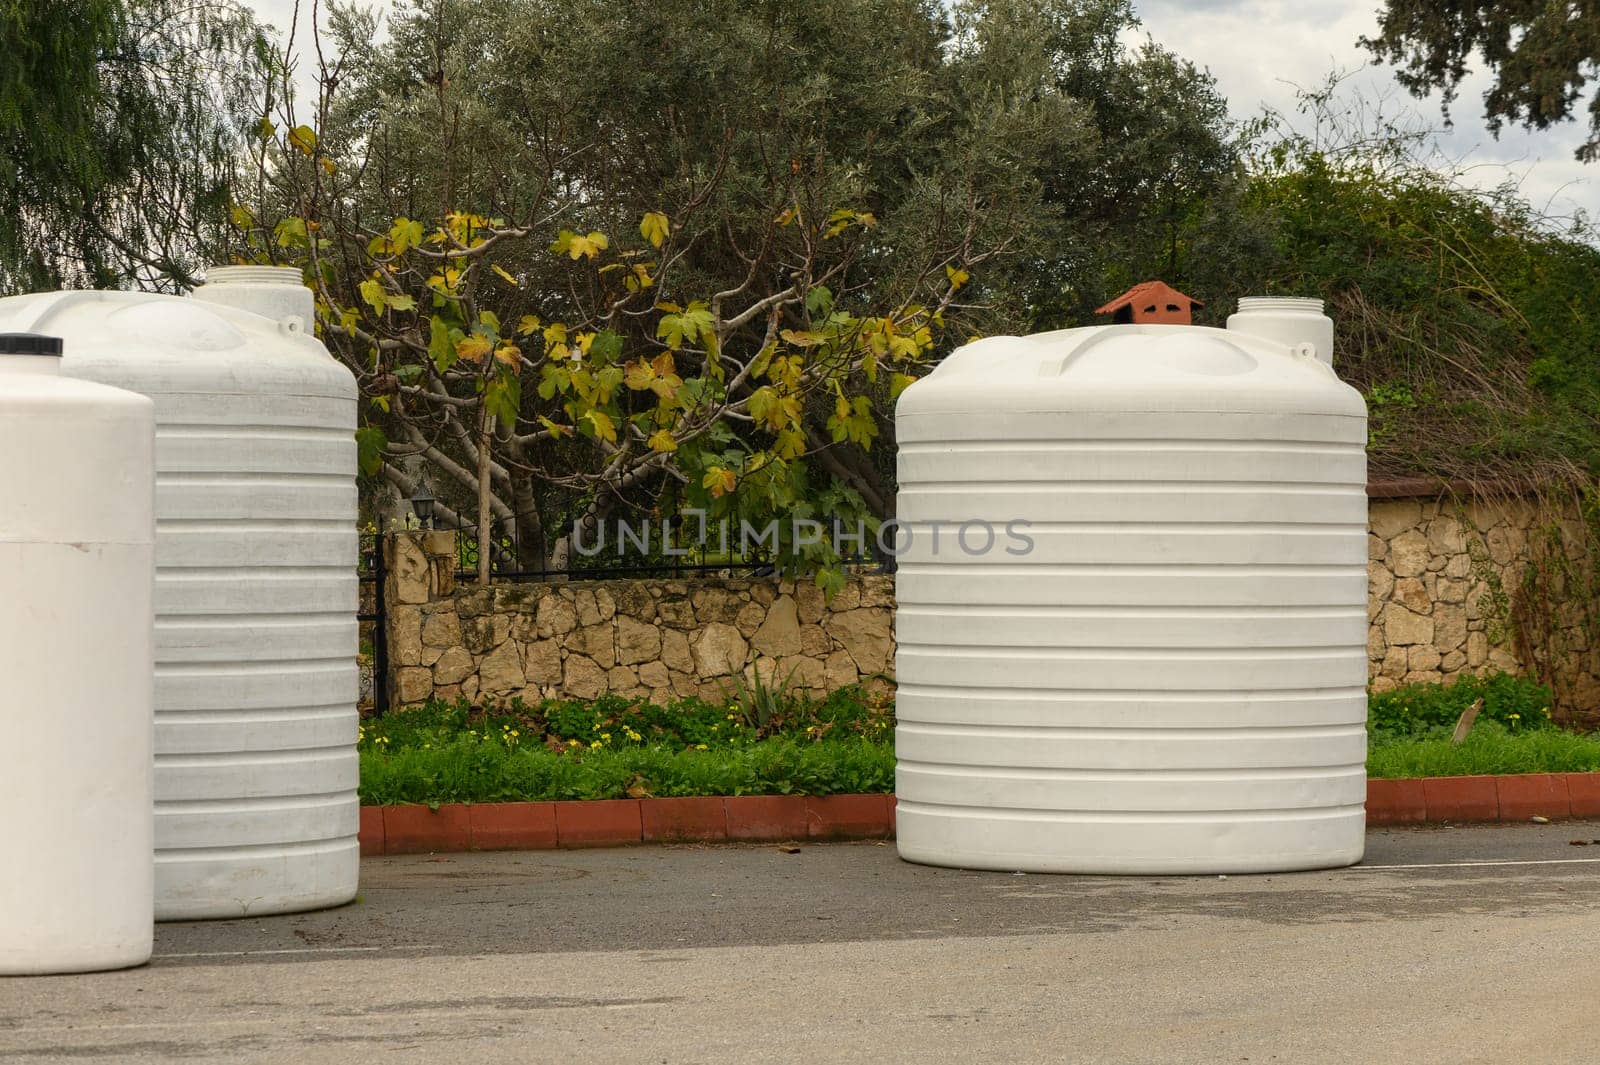 selling water tanks in a village in Cyprus 2 by Mixa74